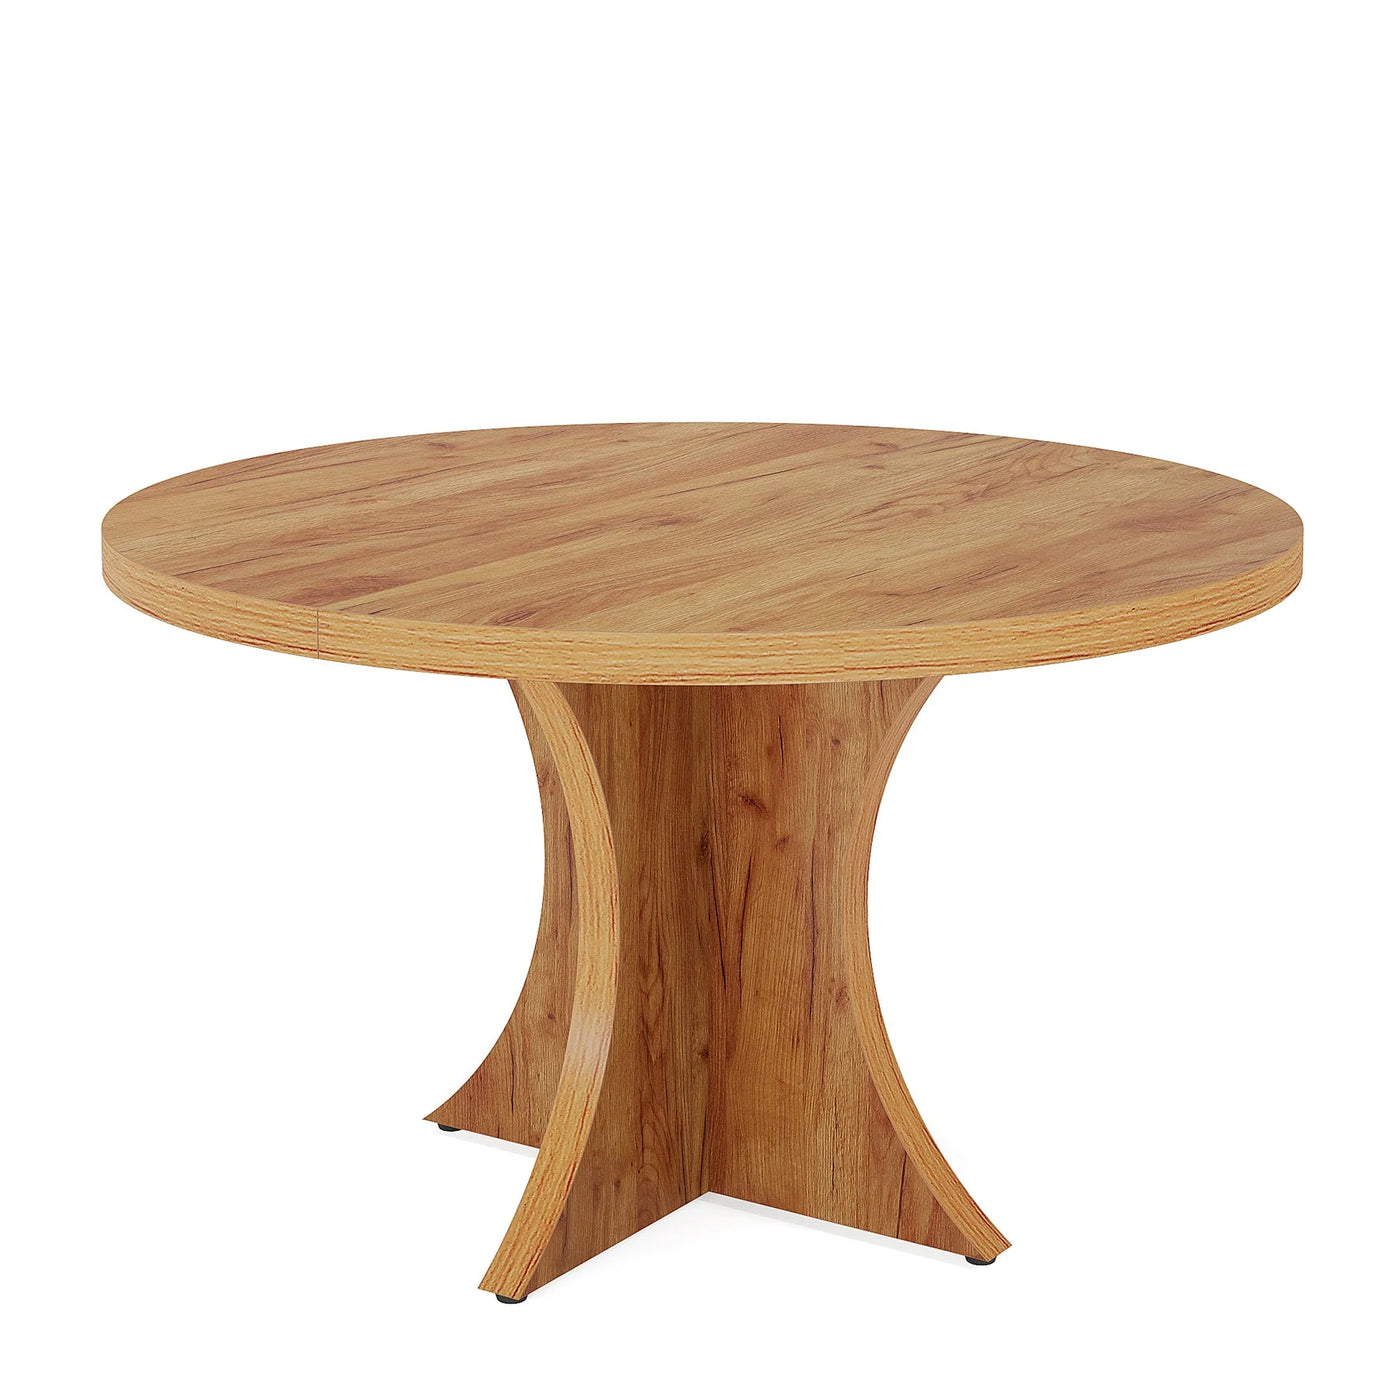 Tensan Round Wood Dining Table | 47.24 Inches Circle Kitchen Table for 4-6